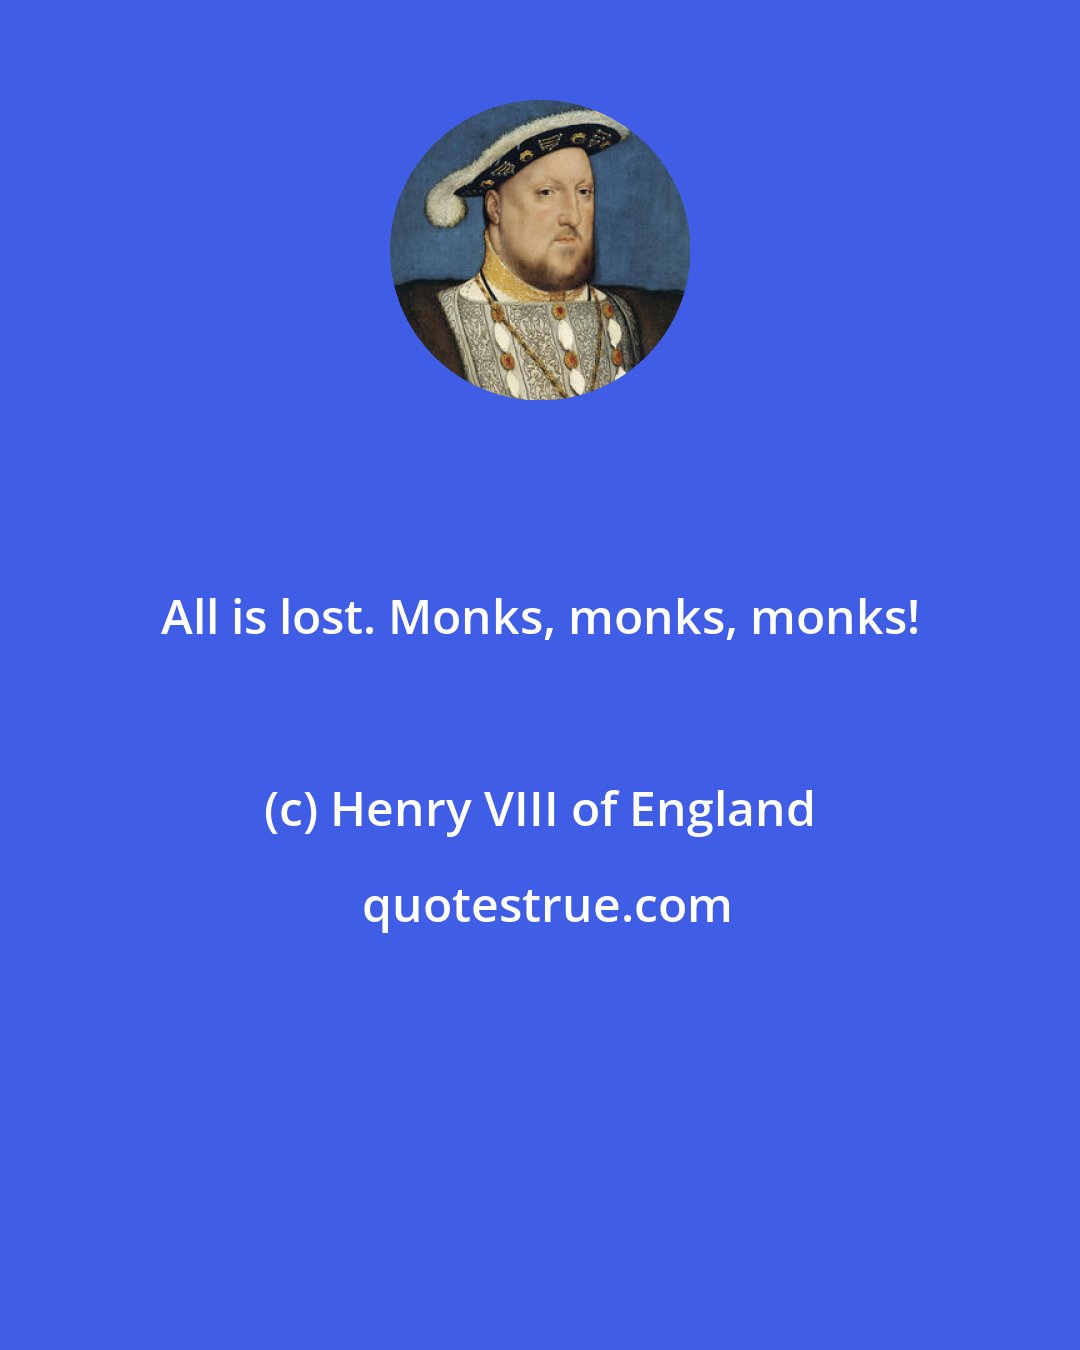 Henry VIII of England: All is lost. Monks, monks, monks!